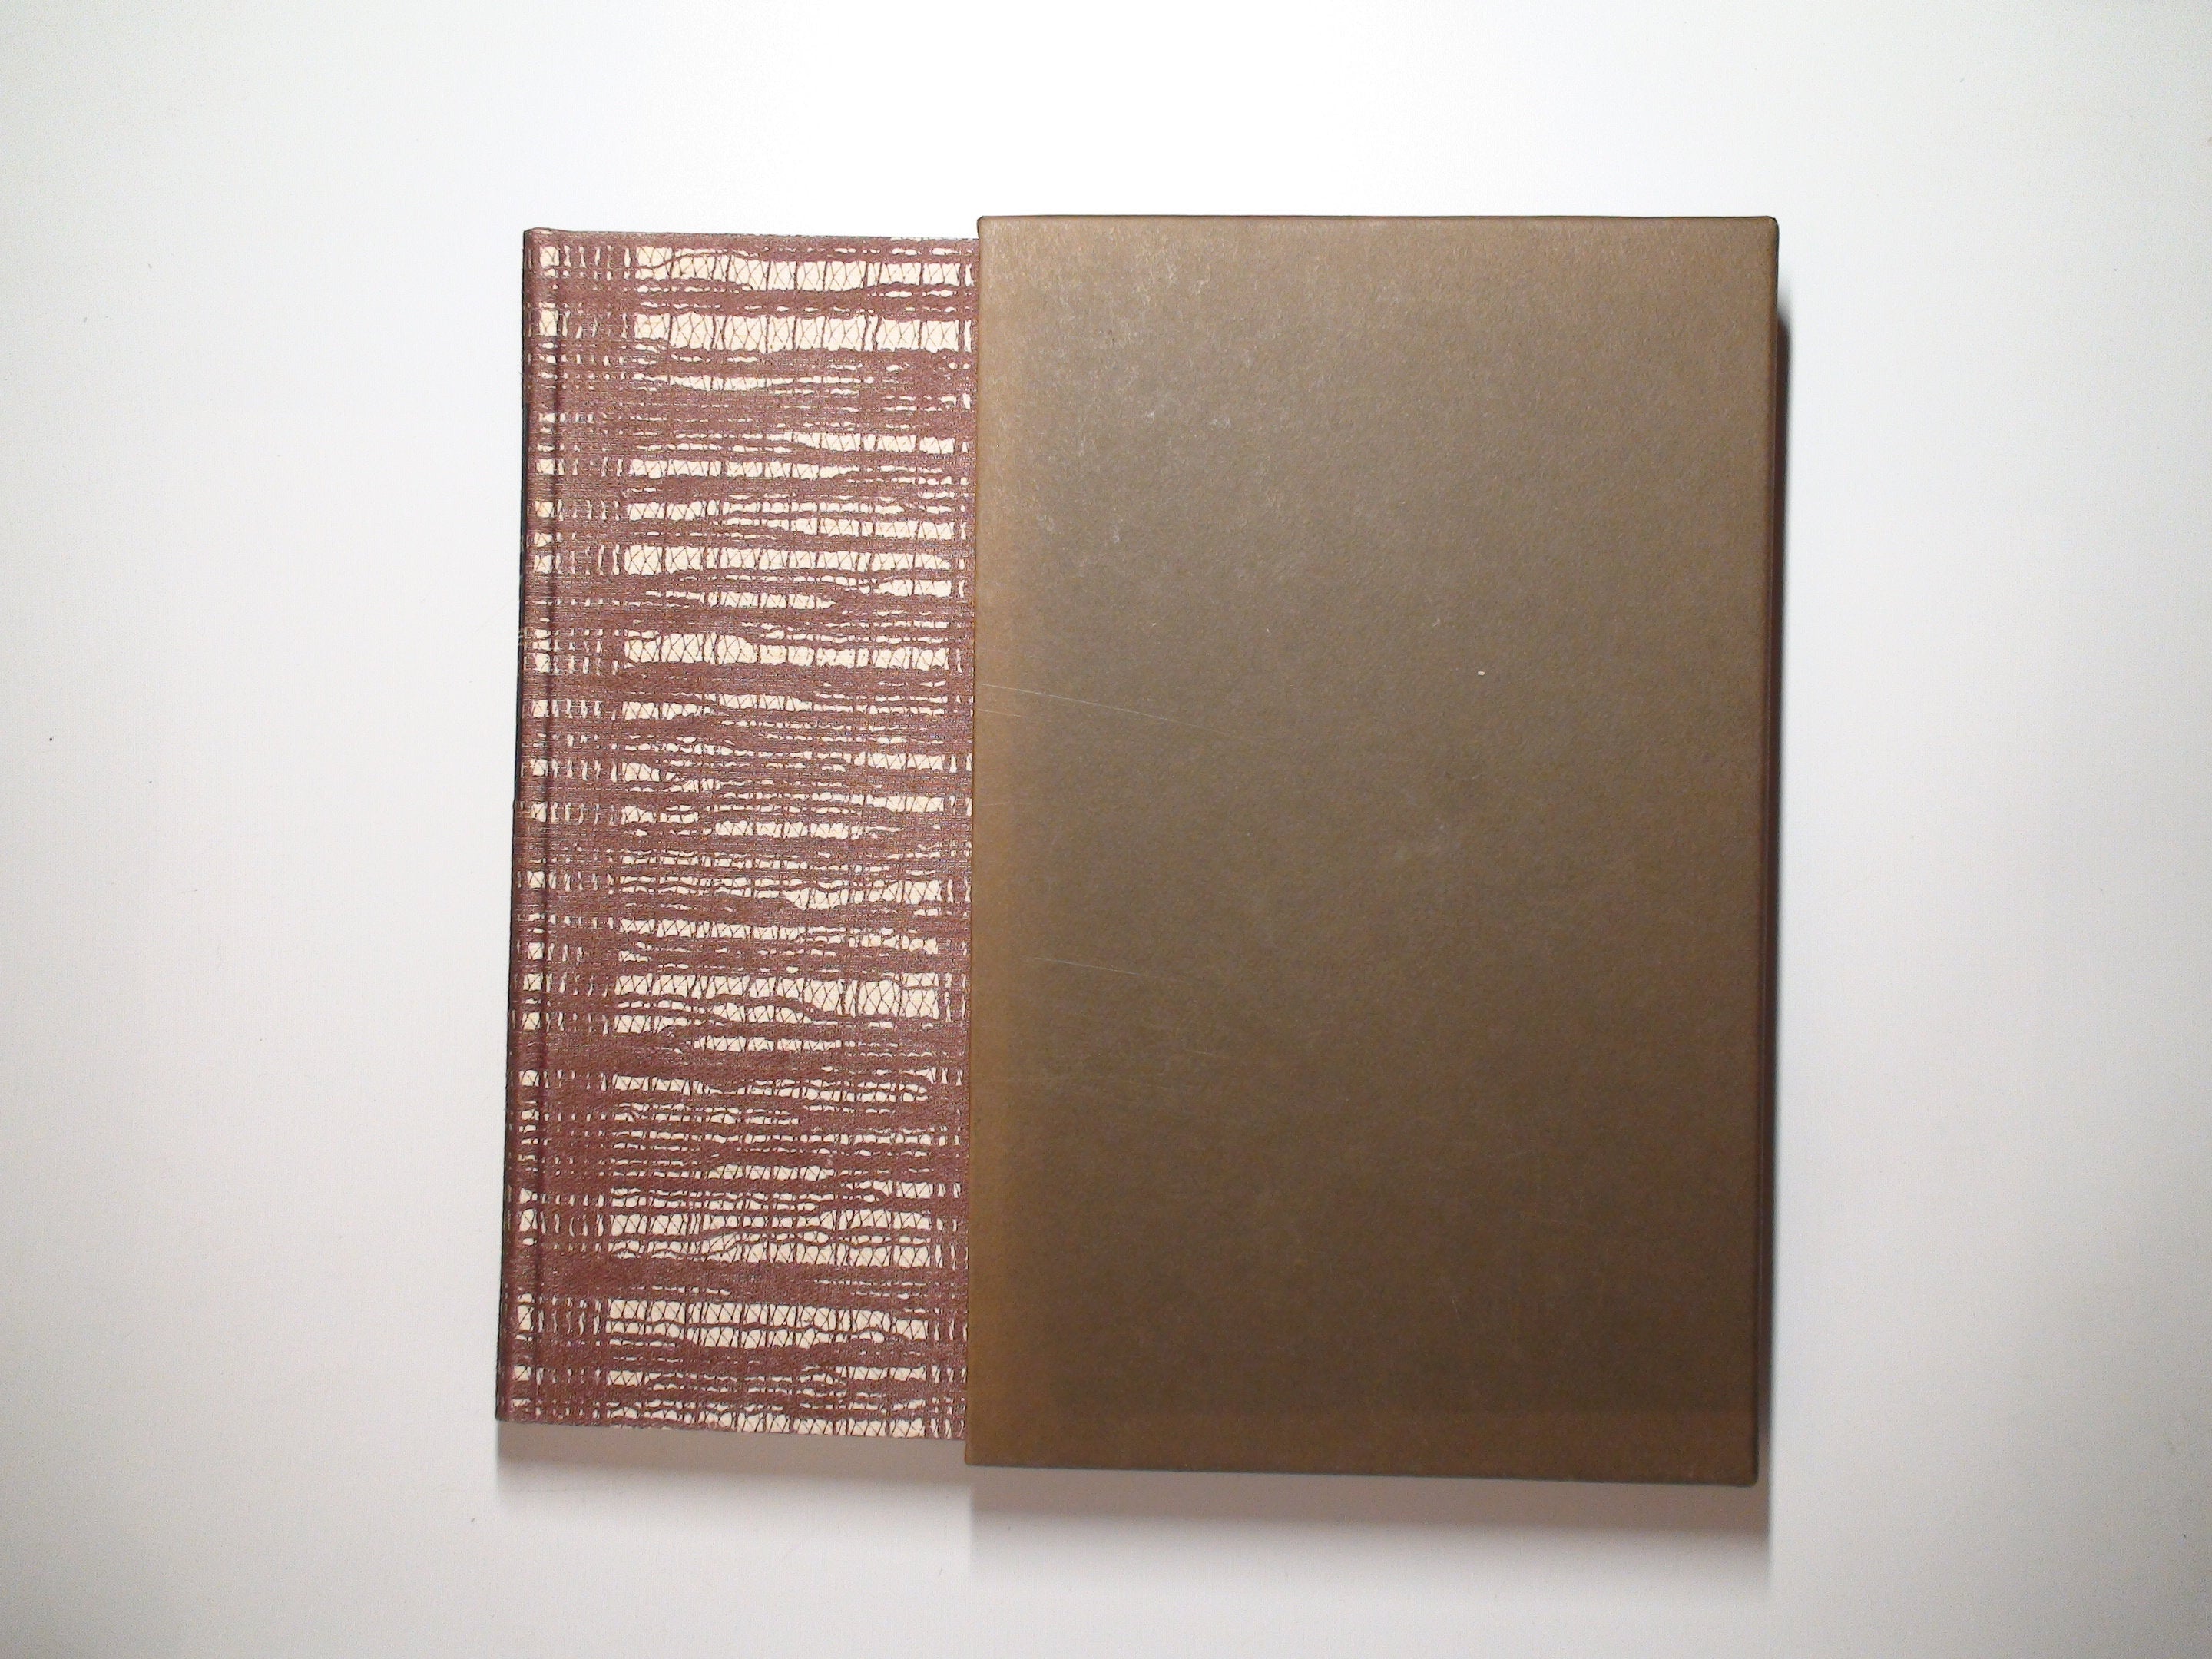 Silas Marner, by George Eliot, Illustrated, 1st Ed, in Slipcase, 1954